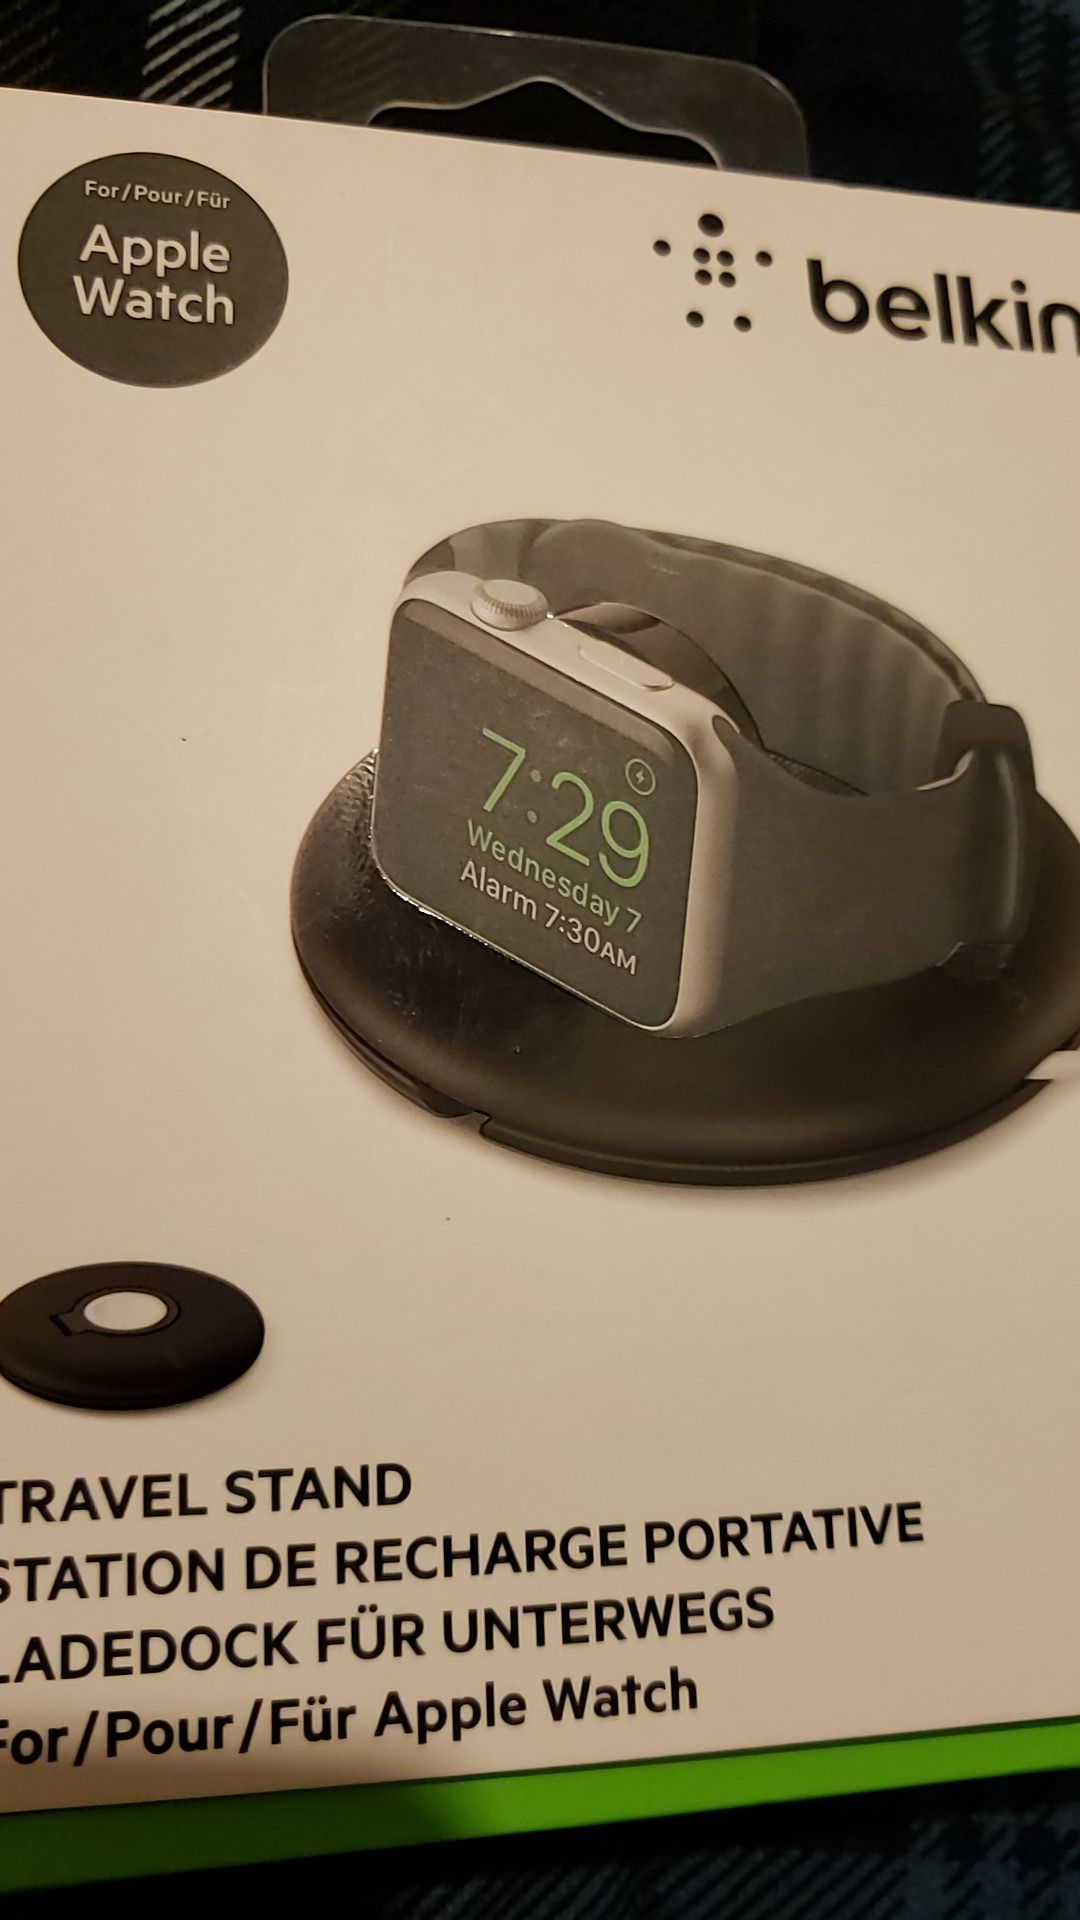 Apple Watch Charger Travel Stand Recharge